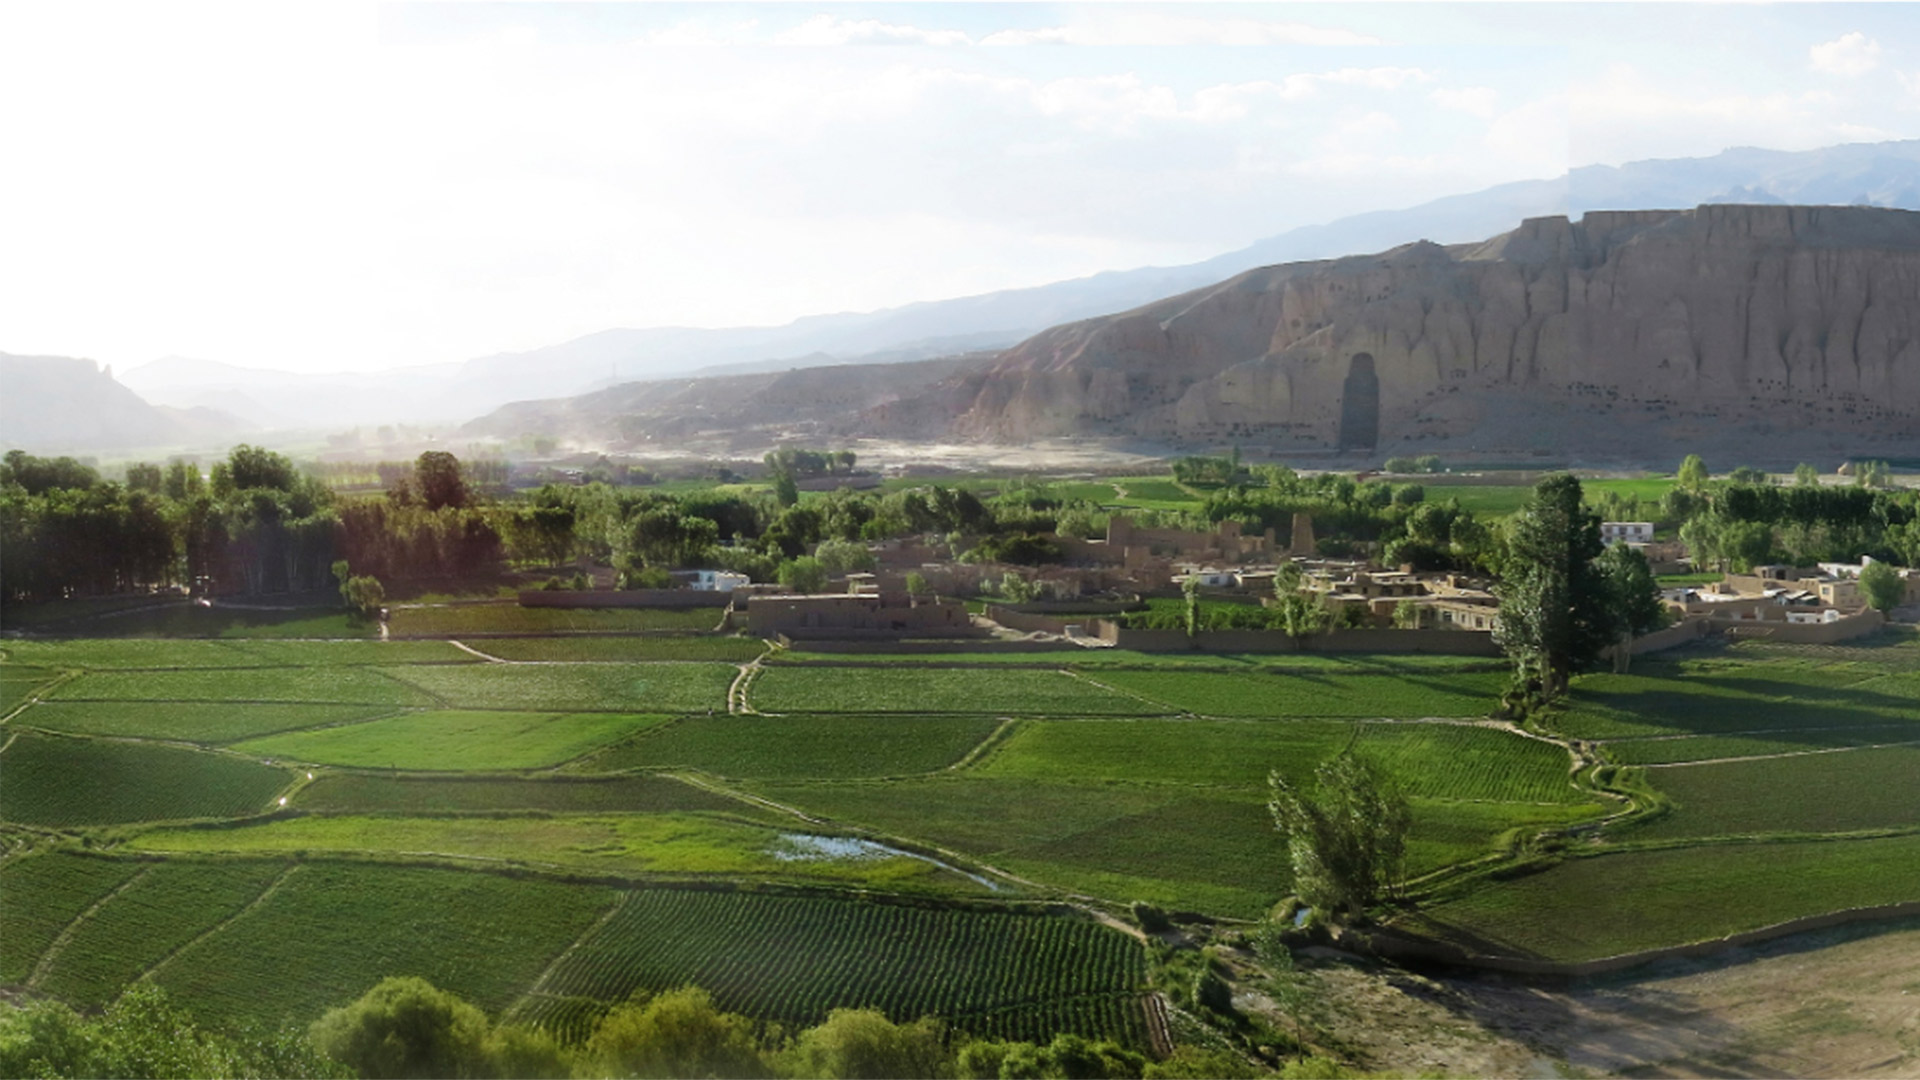 Bamiyan Cultural Centre in Afghanistan by M2R Arquitectos